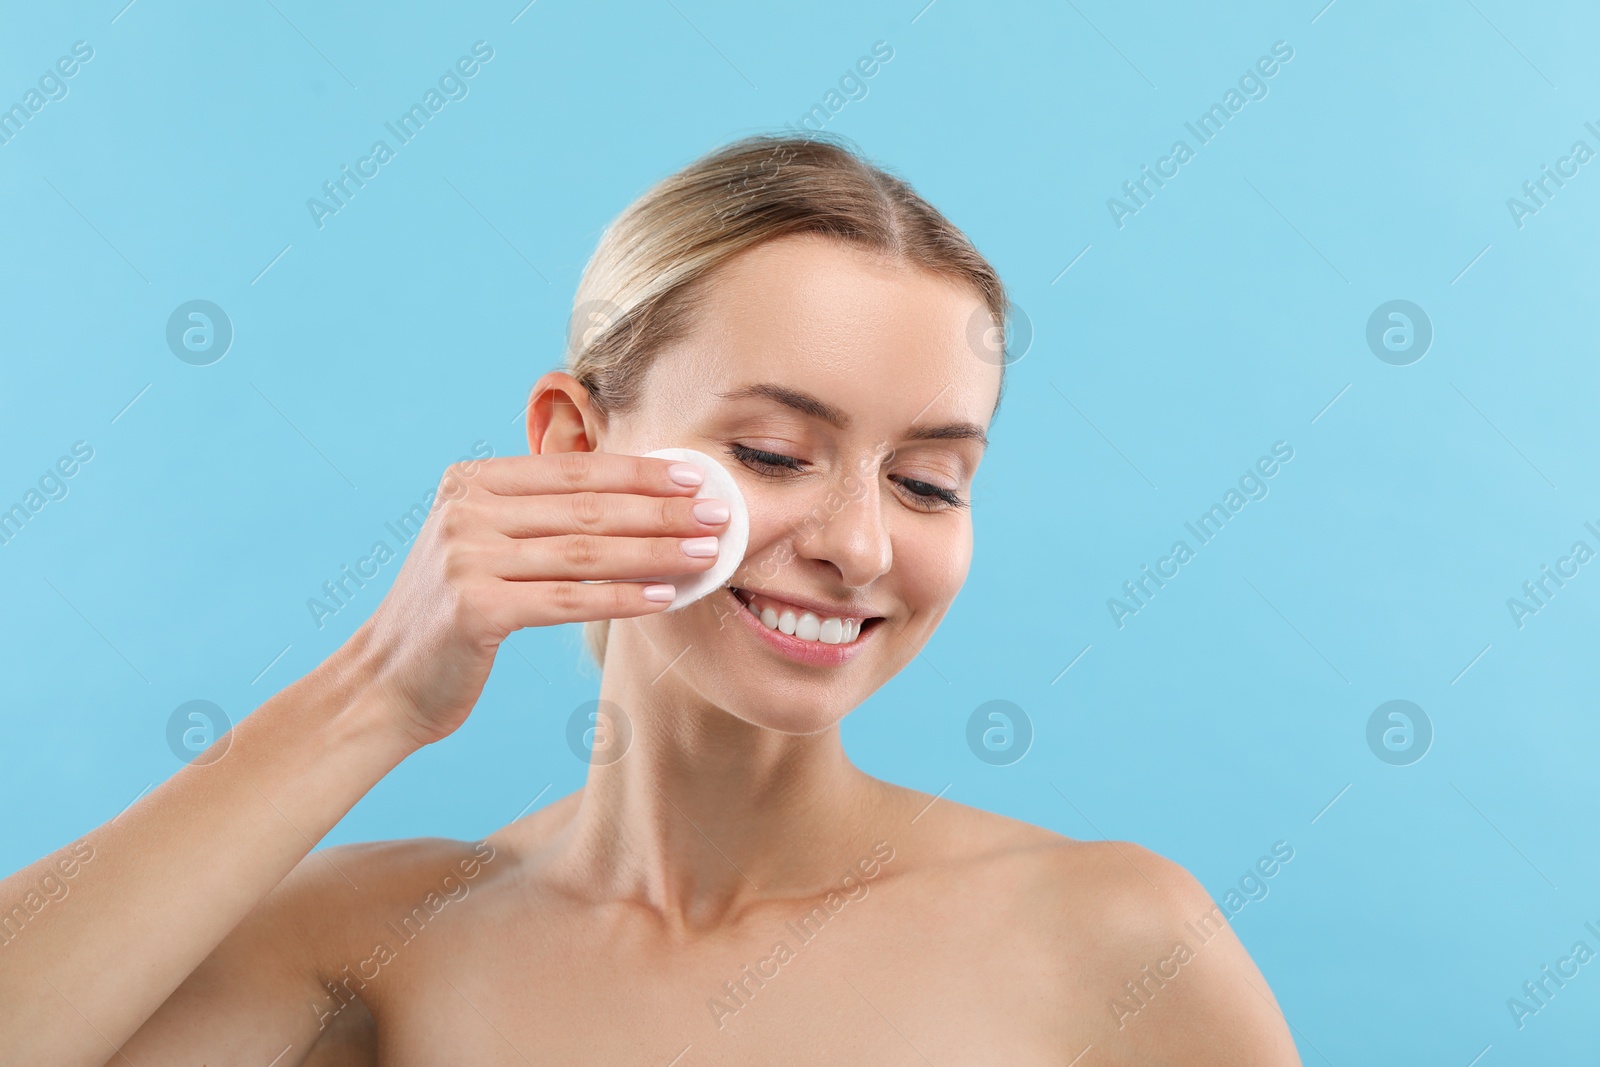 Photo of Smiling woman removing makeup with cotton pad on light blue background